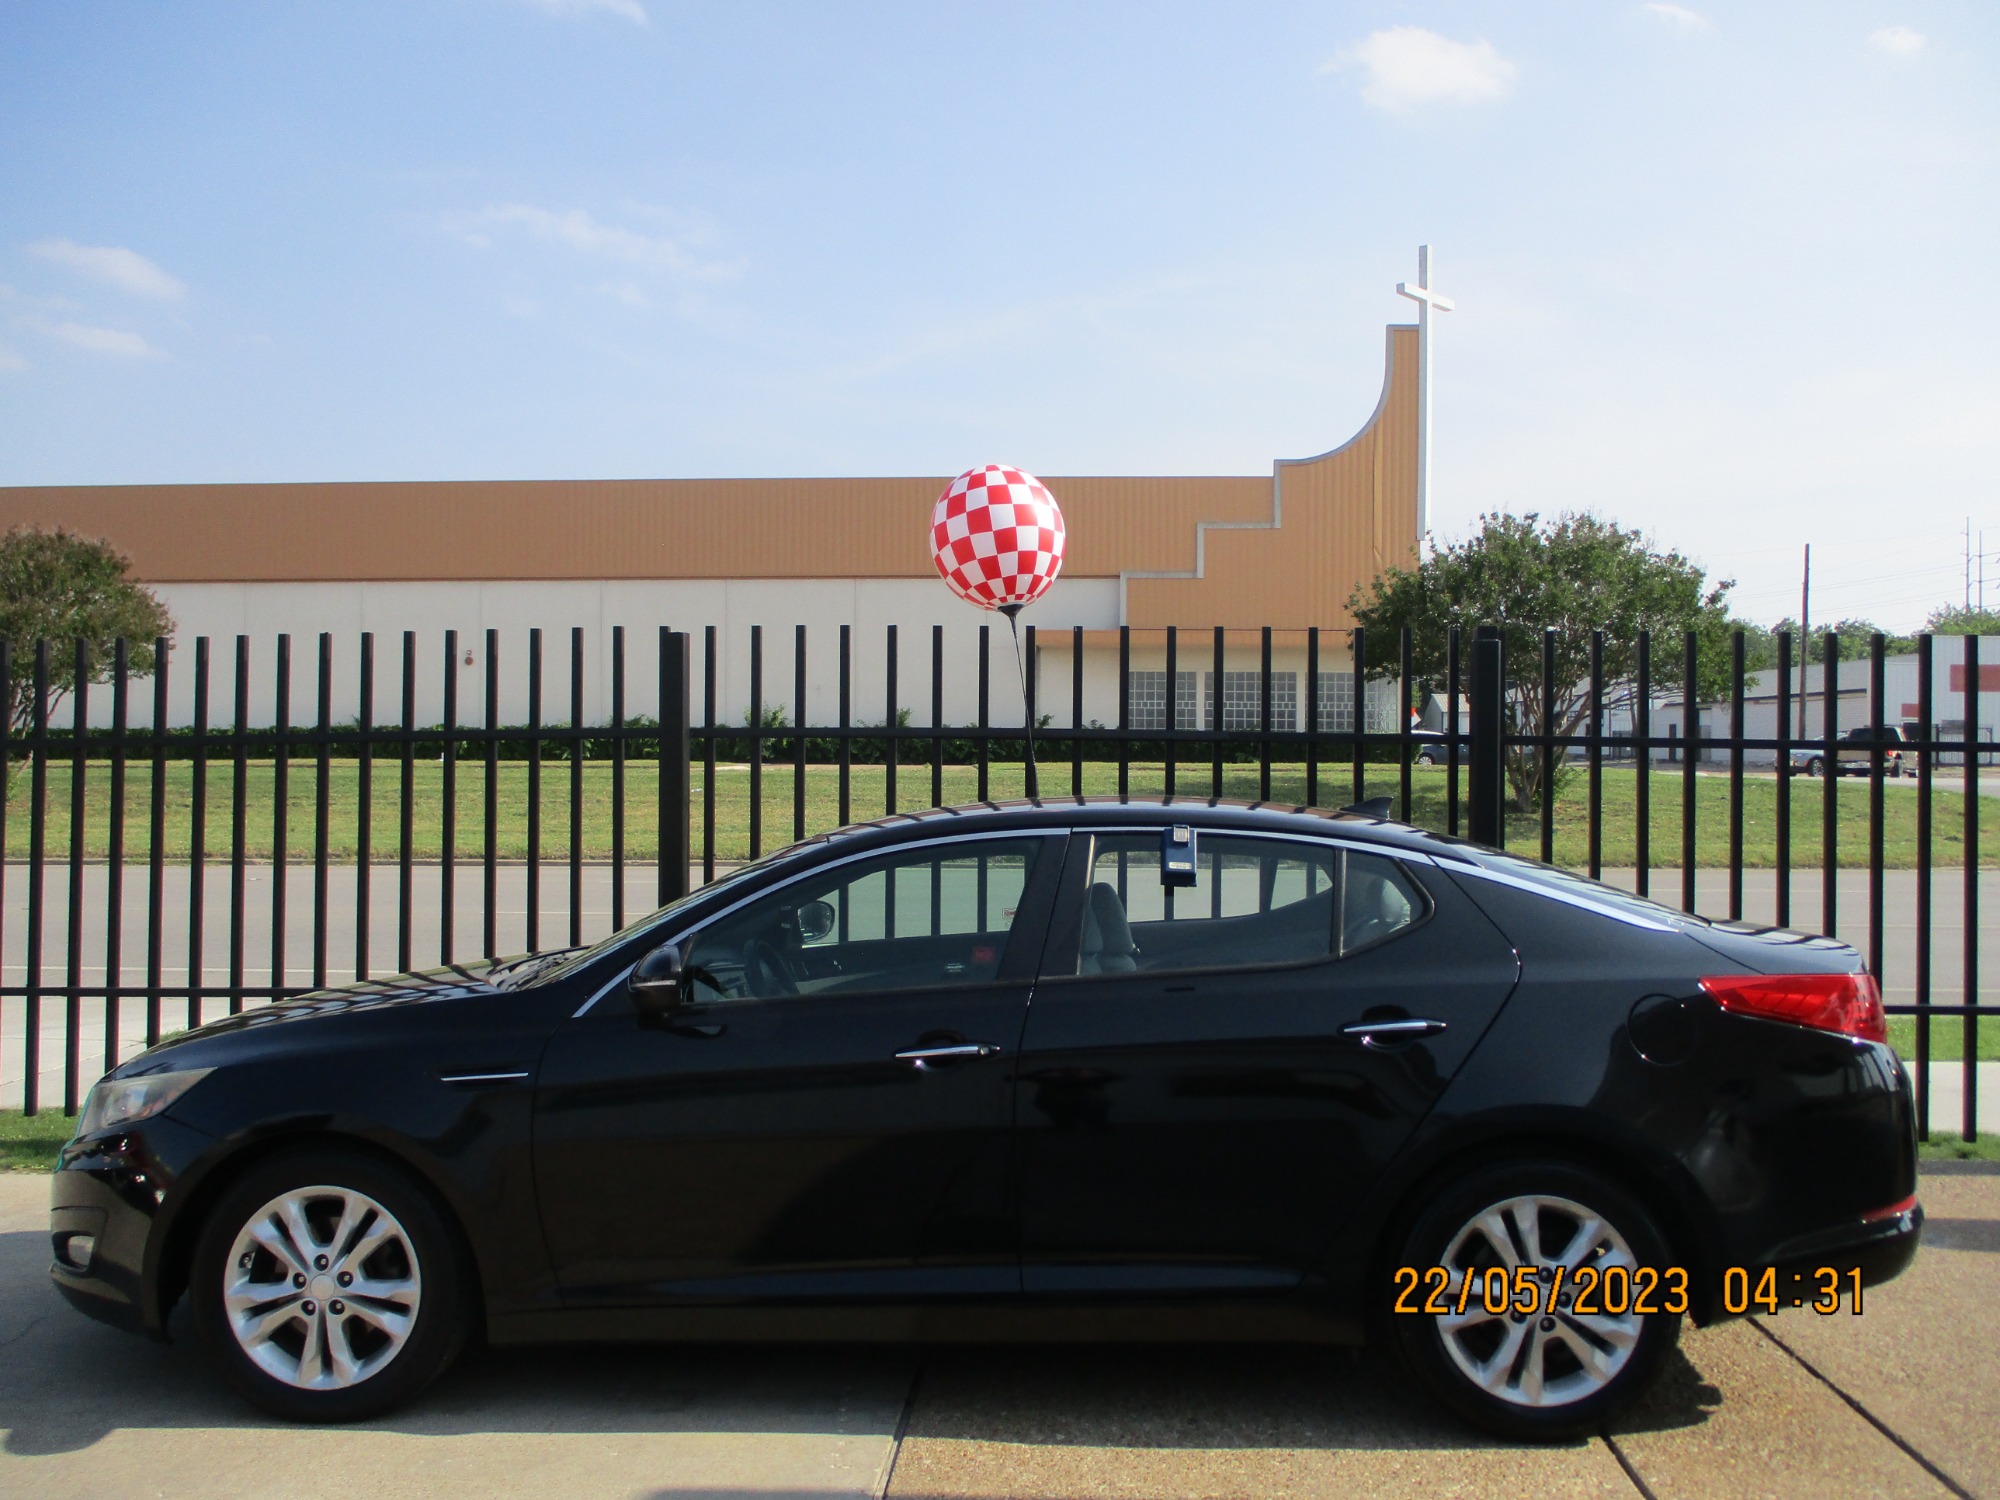 photo of 2013 Kia Optima LX MT               $900.00 DRIVE OFF SPECIAL (WITH APPROVED APP)